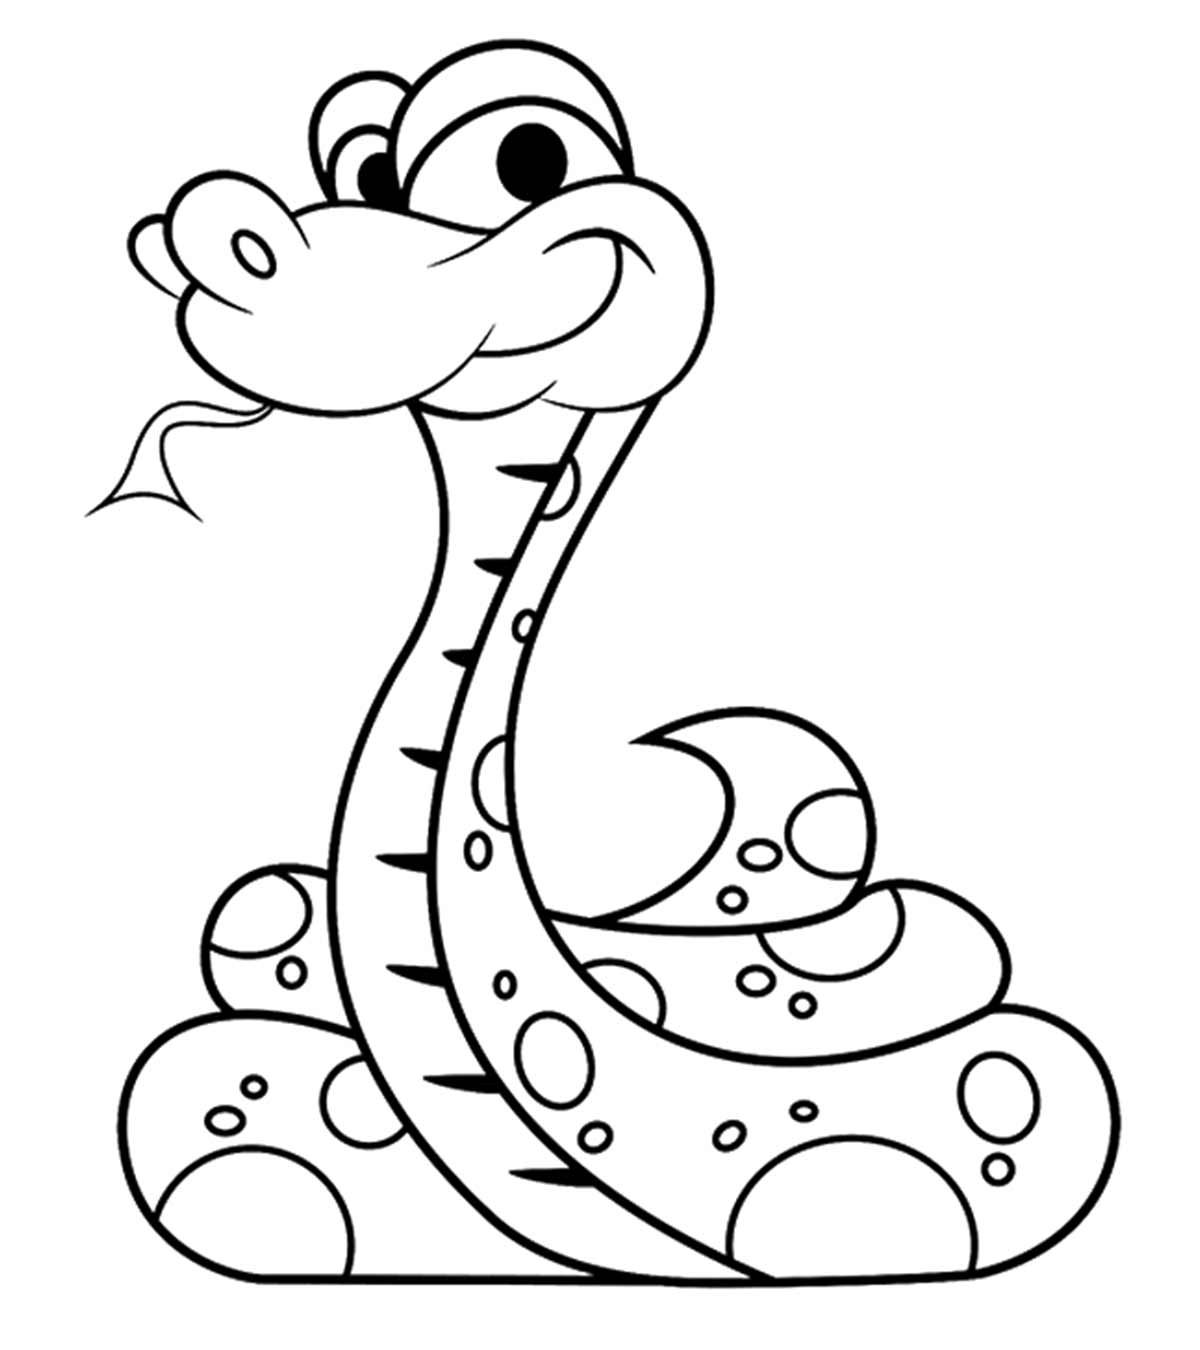 Top 25 Snake Coloring Pages For Your Naughty Kid